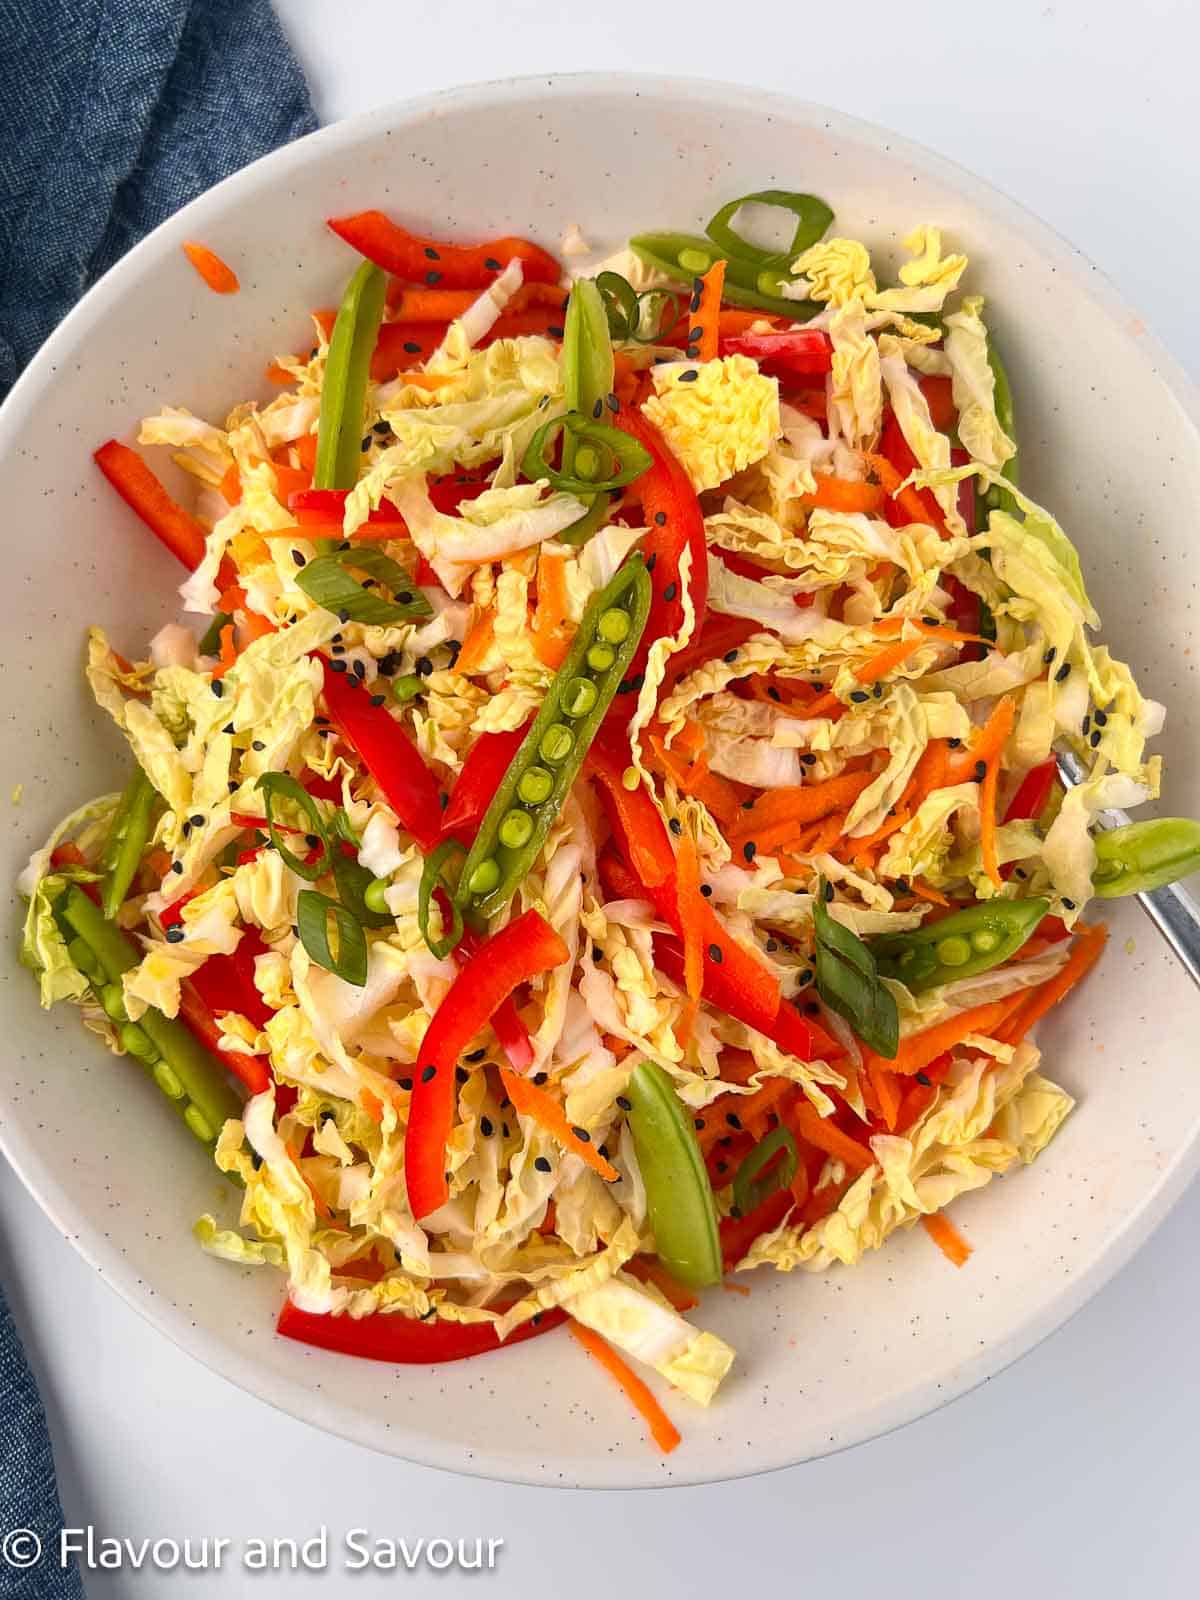 A bowl of Thai-style coleslaw with Napa cabbage, carrots red bell pepper, sugar snap pea pods and green onions.